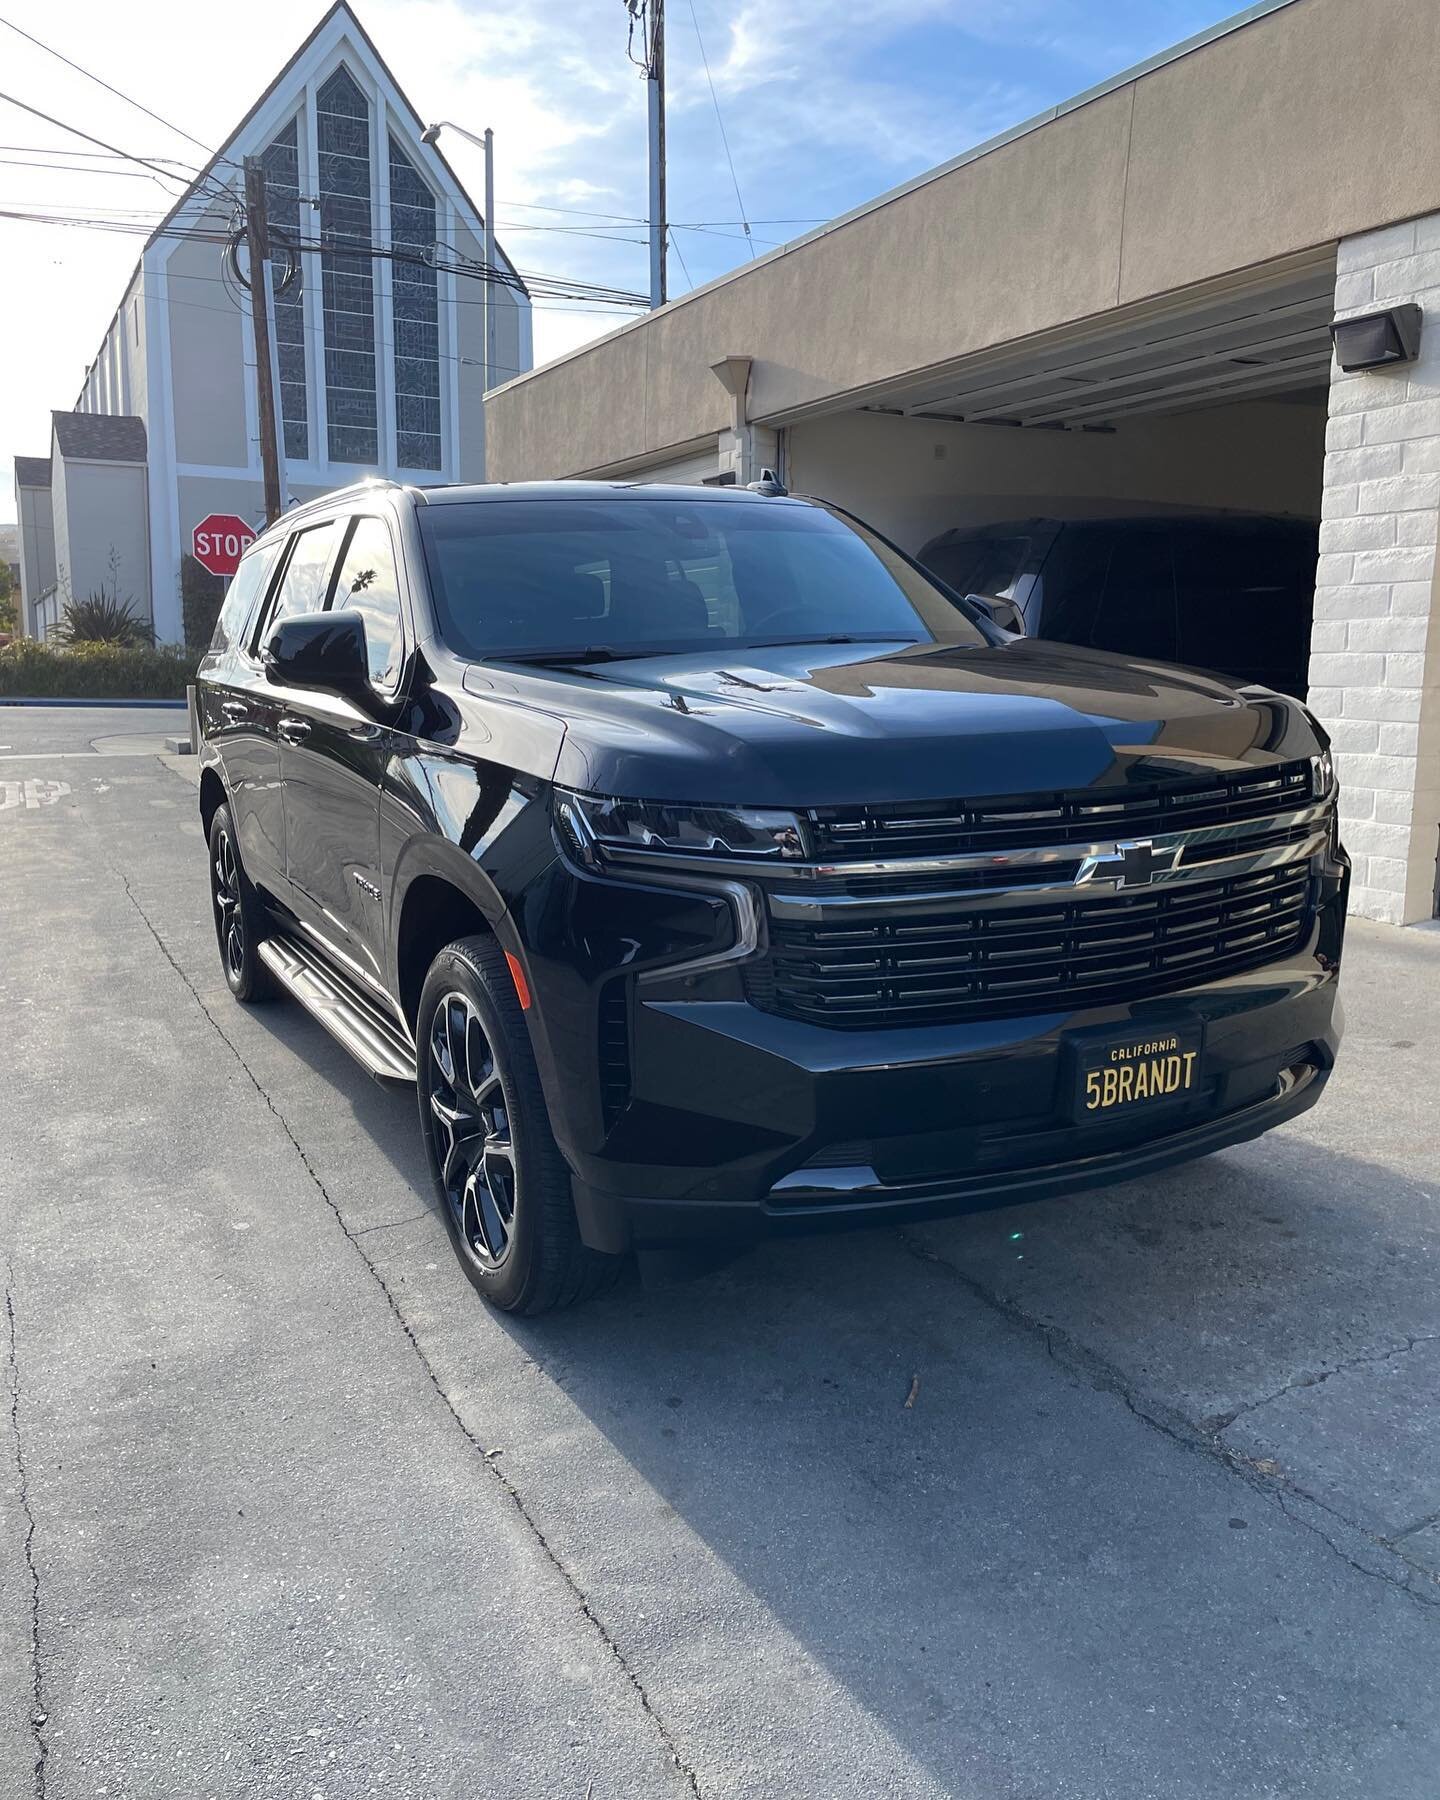 This customer came to me after they were unhappy with the over priced and sub par detail done at a commercial car wash. Chevy Tahoe full detail.